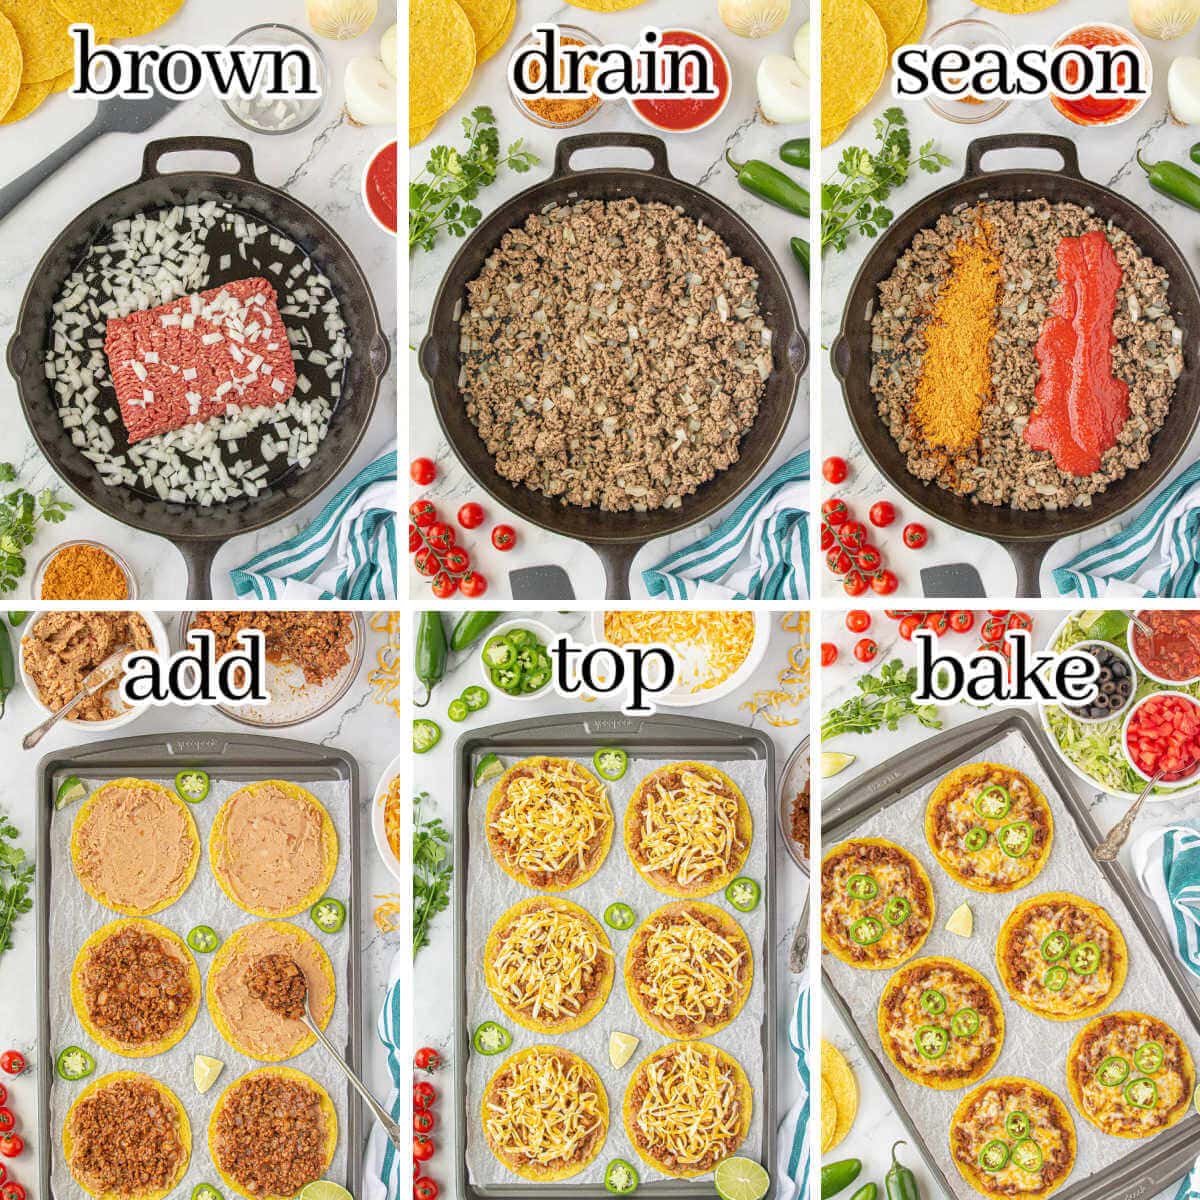 Step-by-step instructions to make recipe, with print overlay.